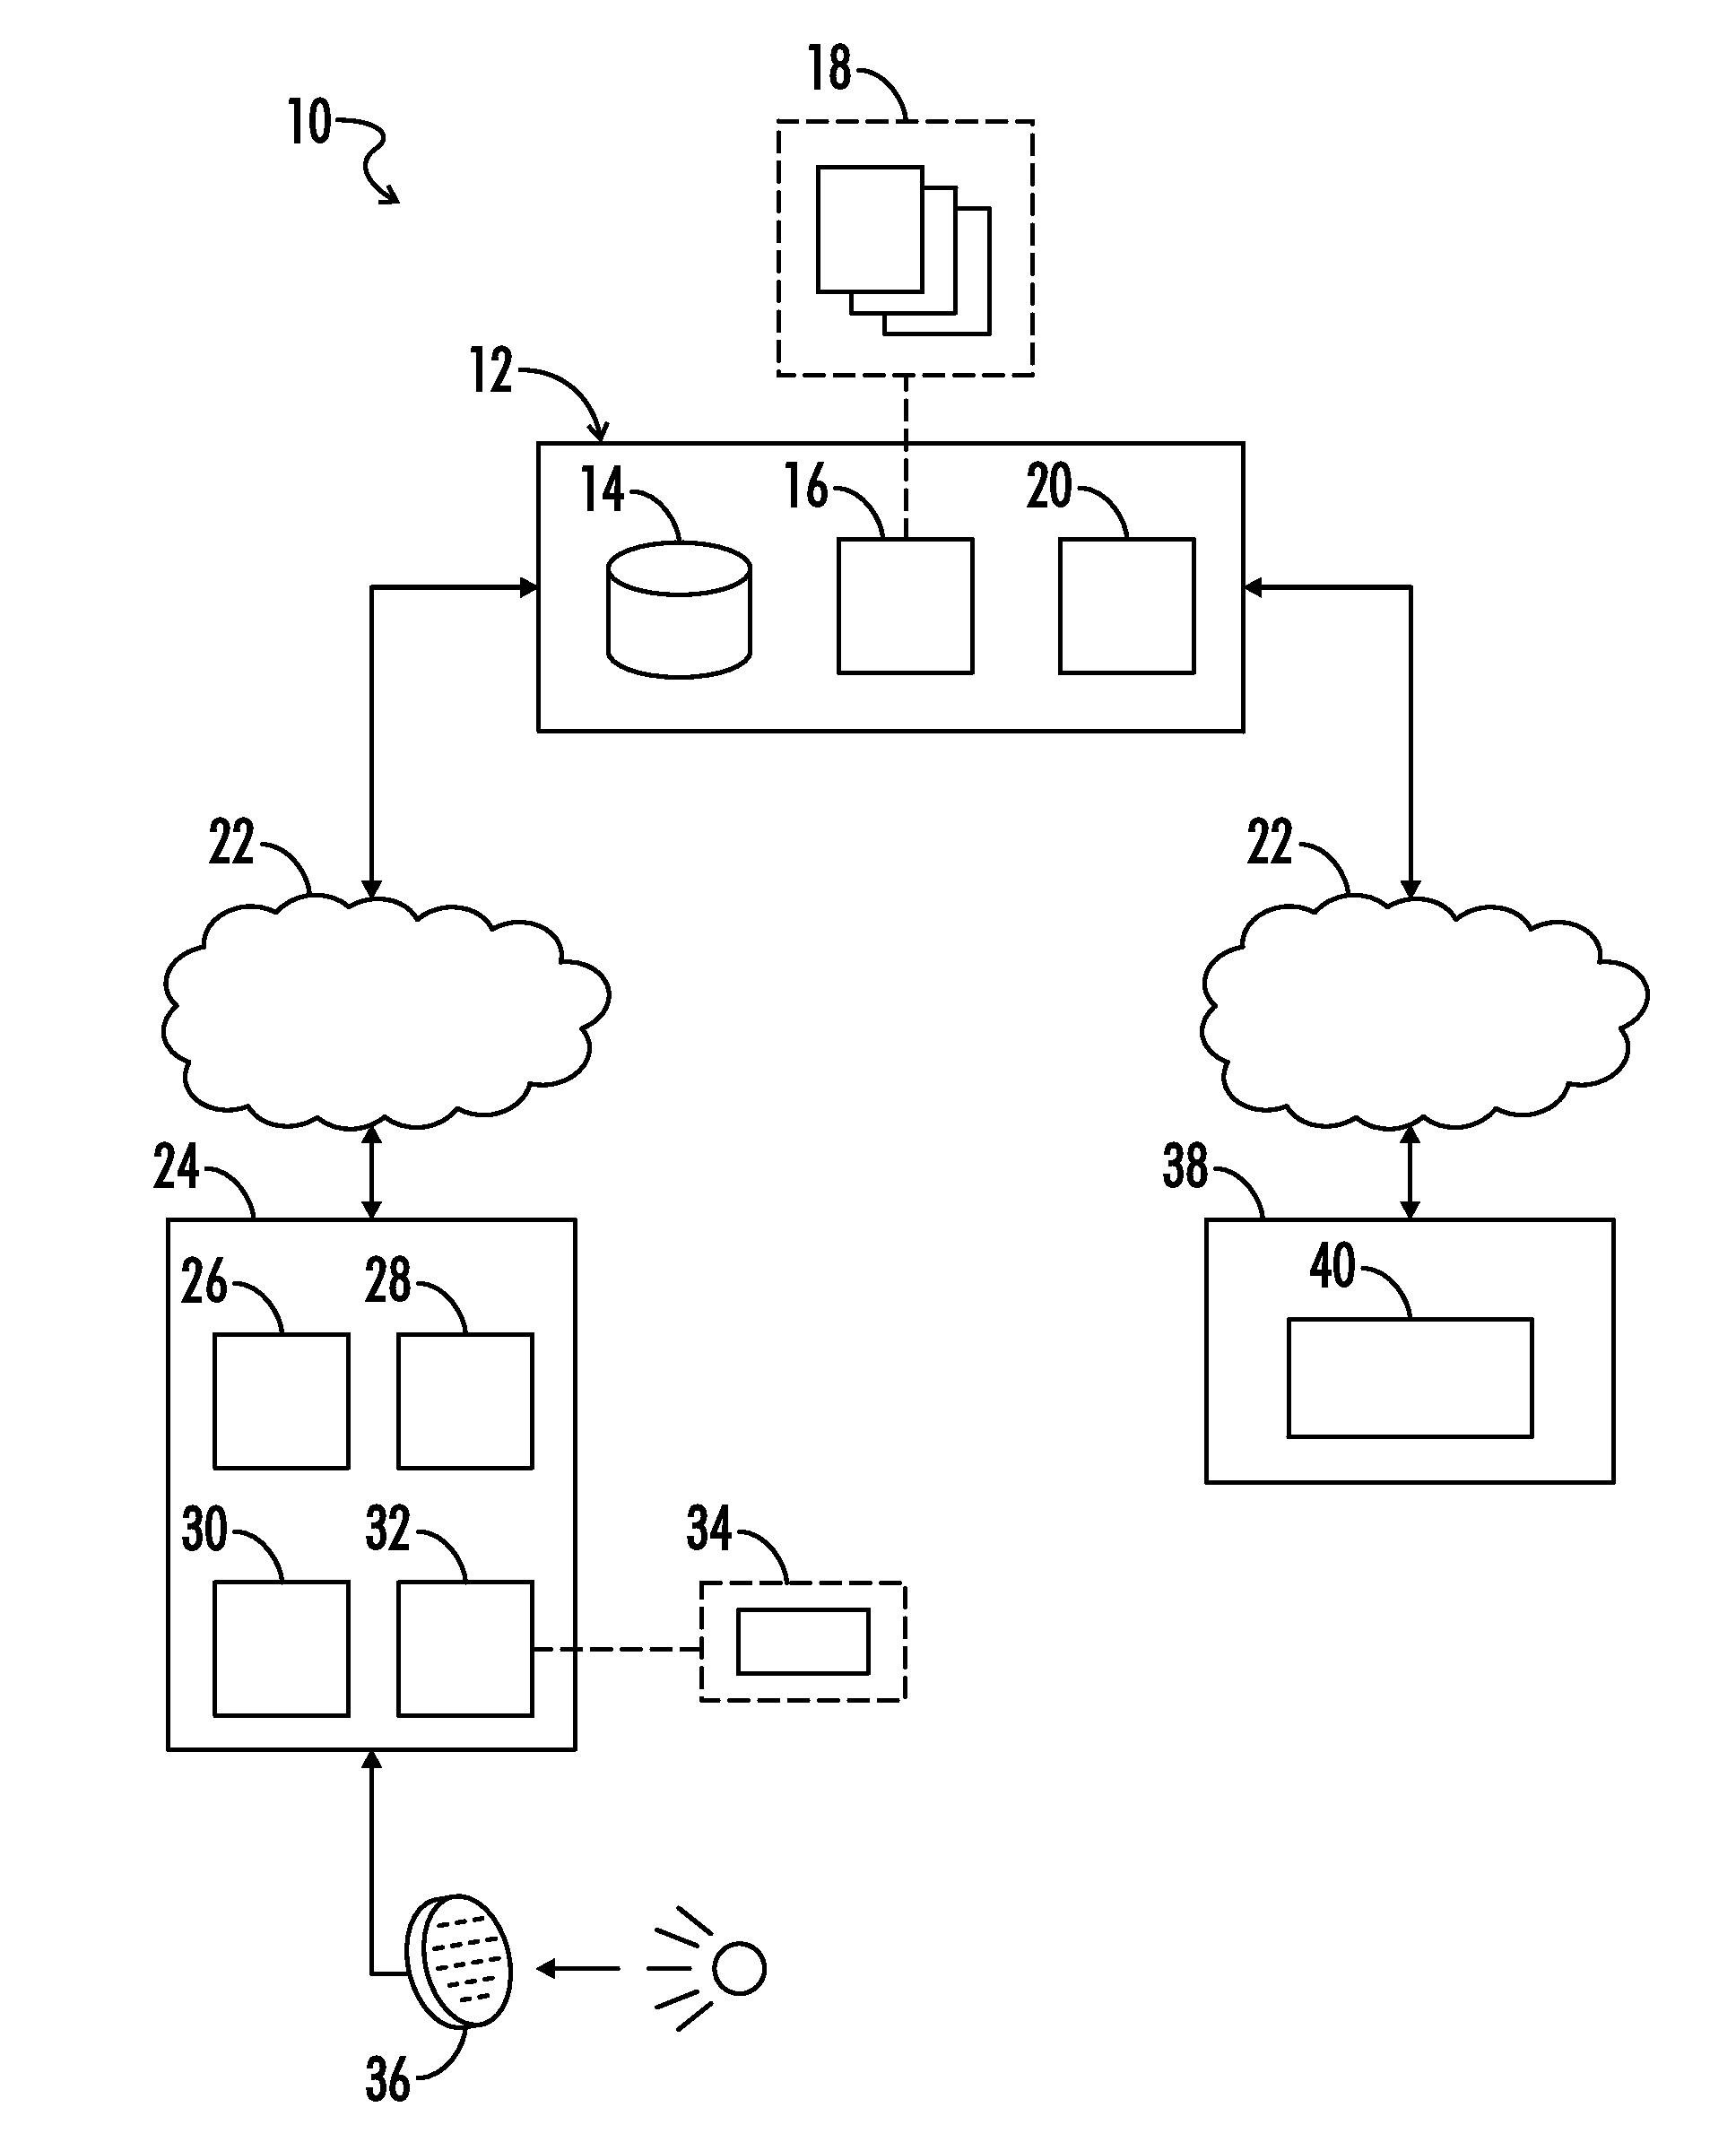 Electronic health record system and method for patient encounter transcription and documentation